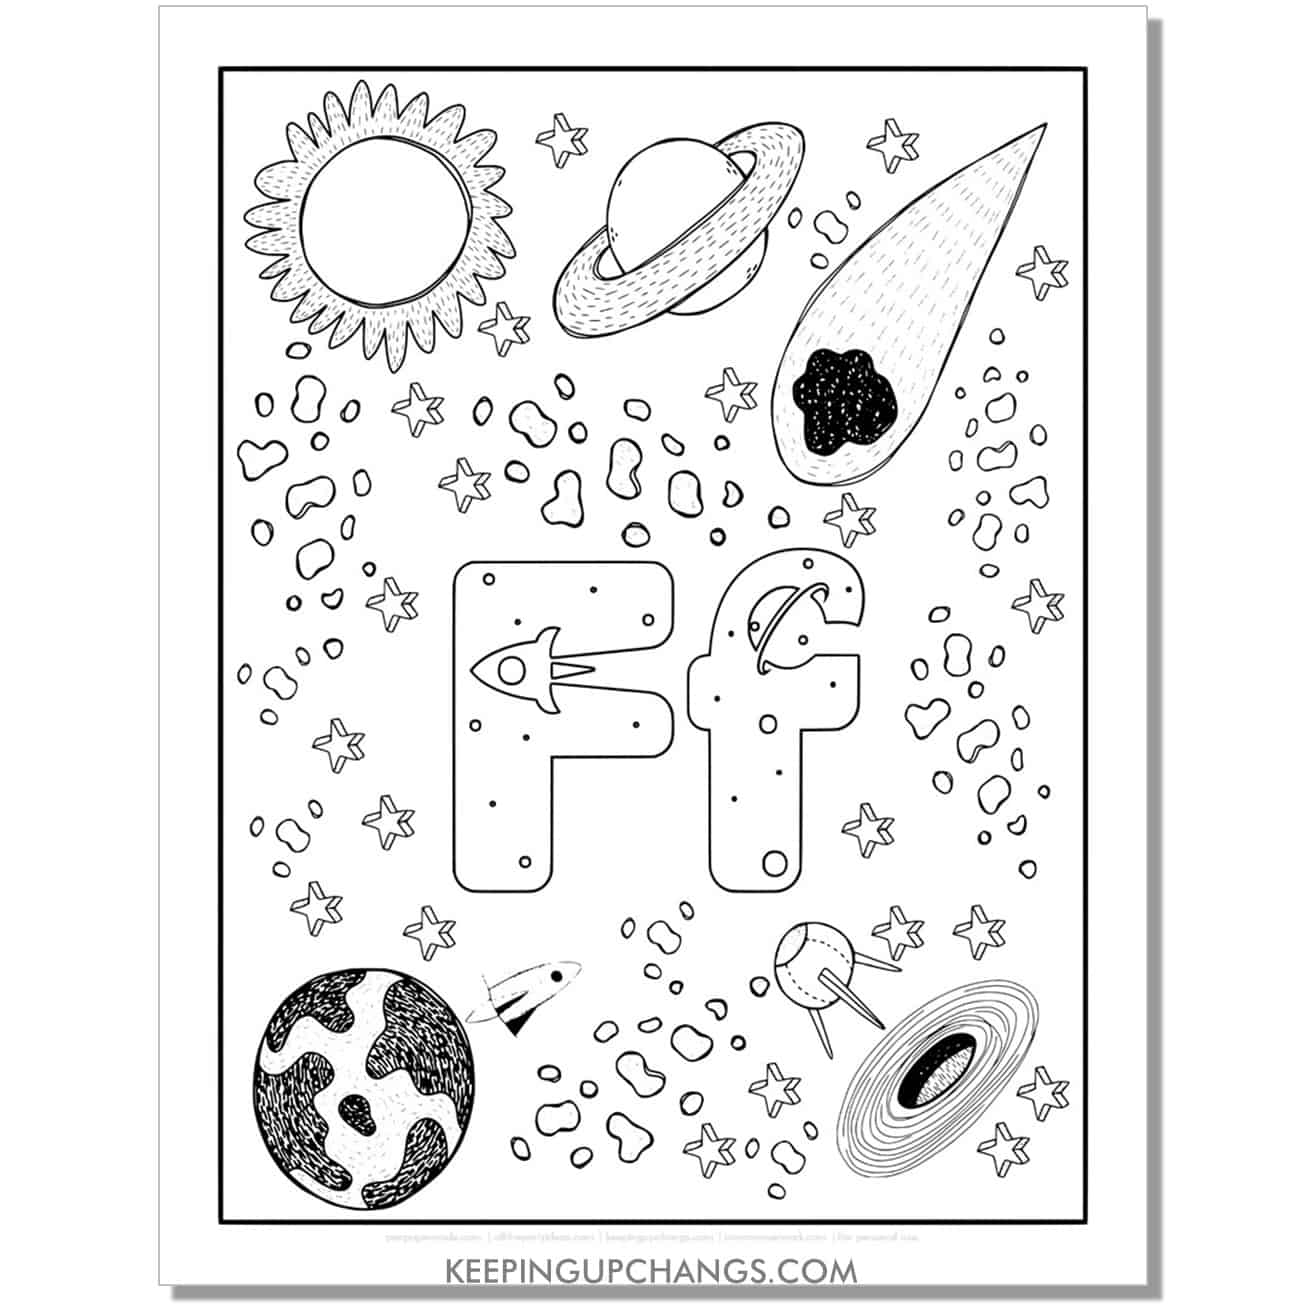 free alphabet letter f coloring page for kids with rockets, space theme.